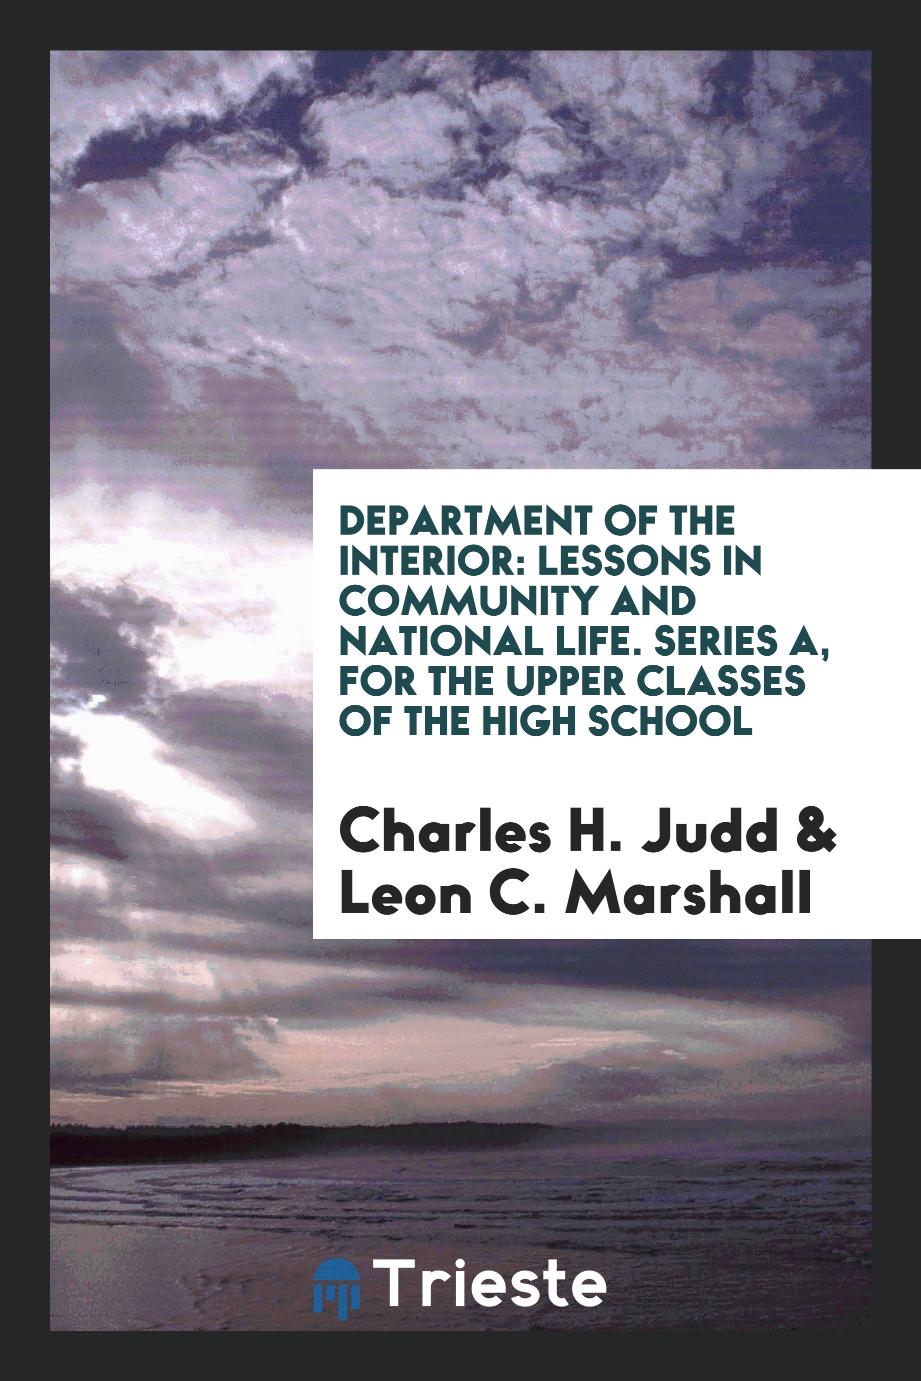 Department of the Interior: Lessons in Community and National Life. Series A, for the Upper Classes of the High School